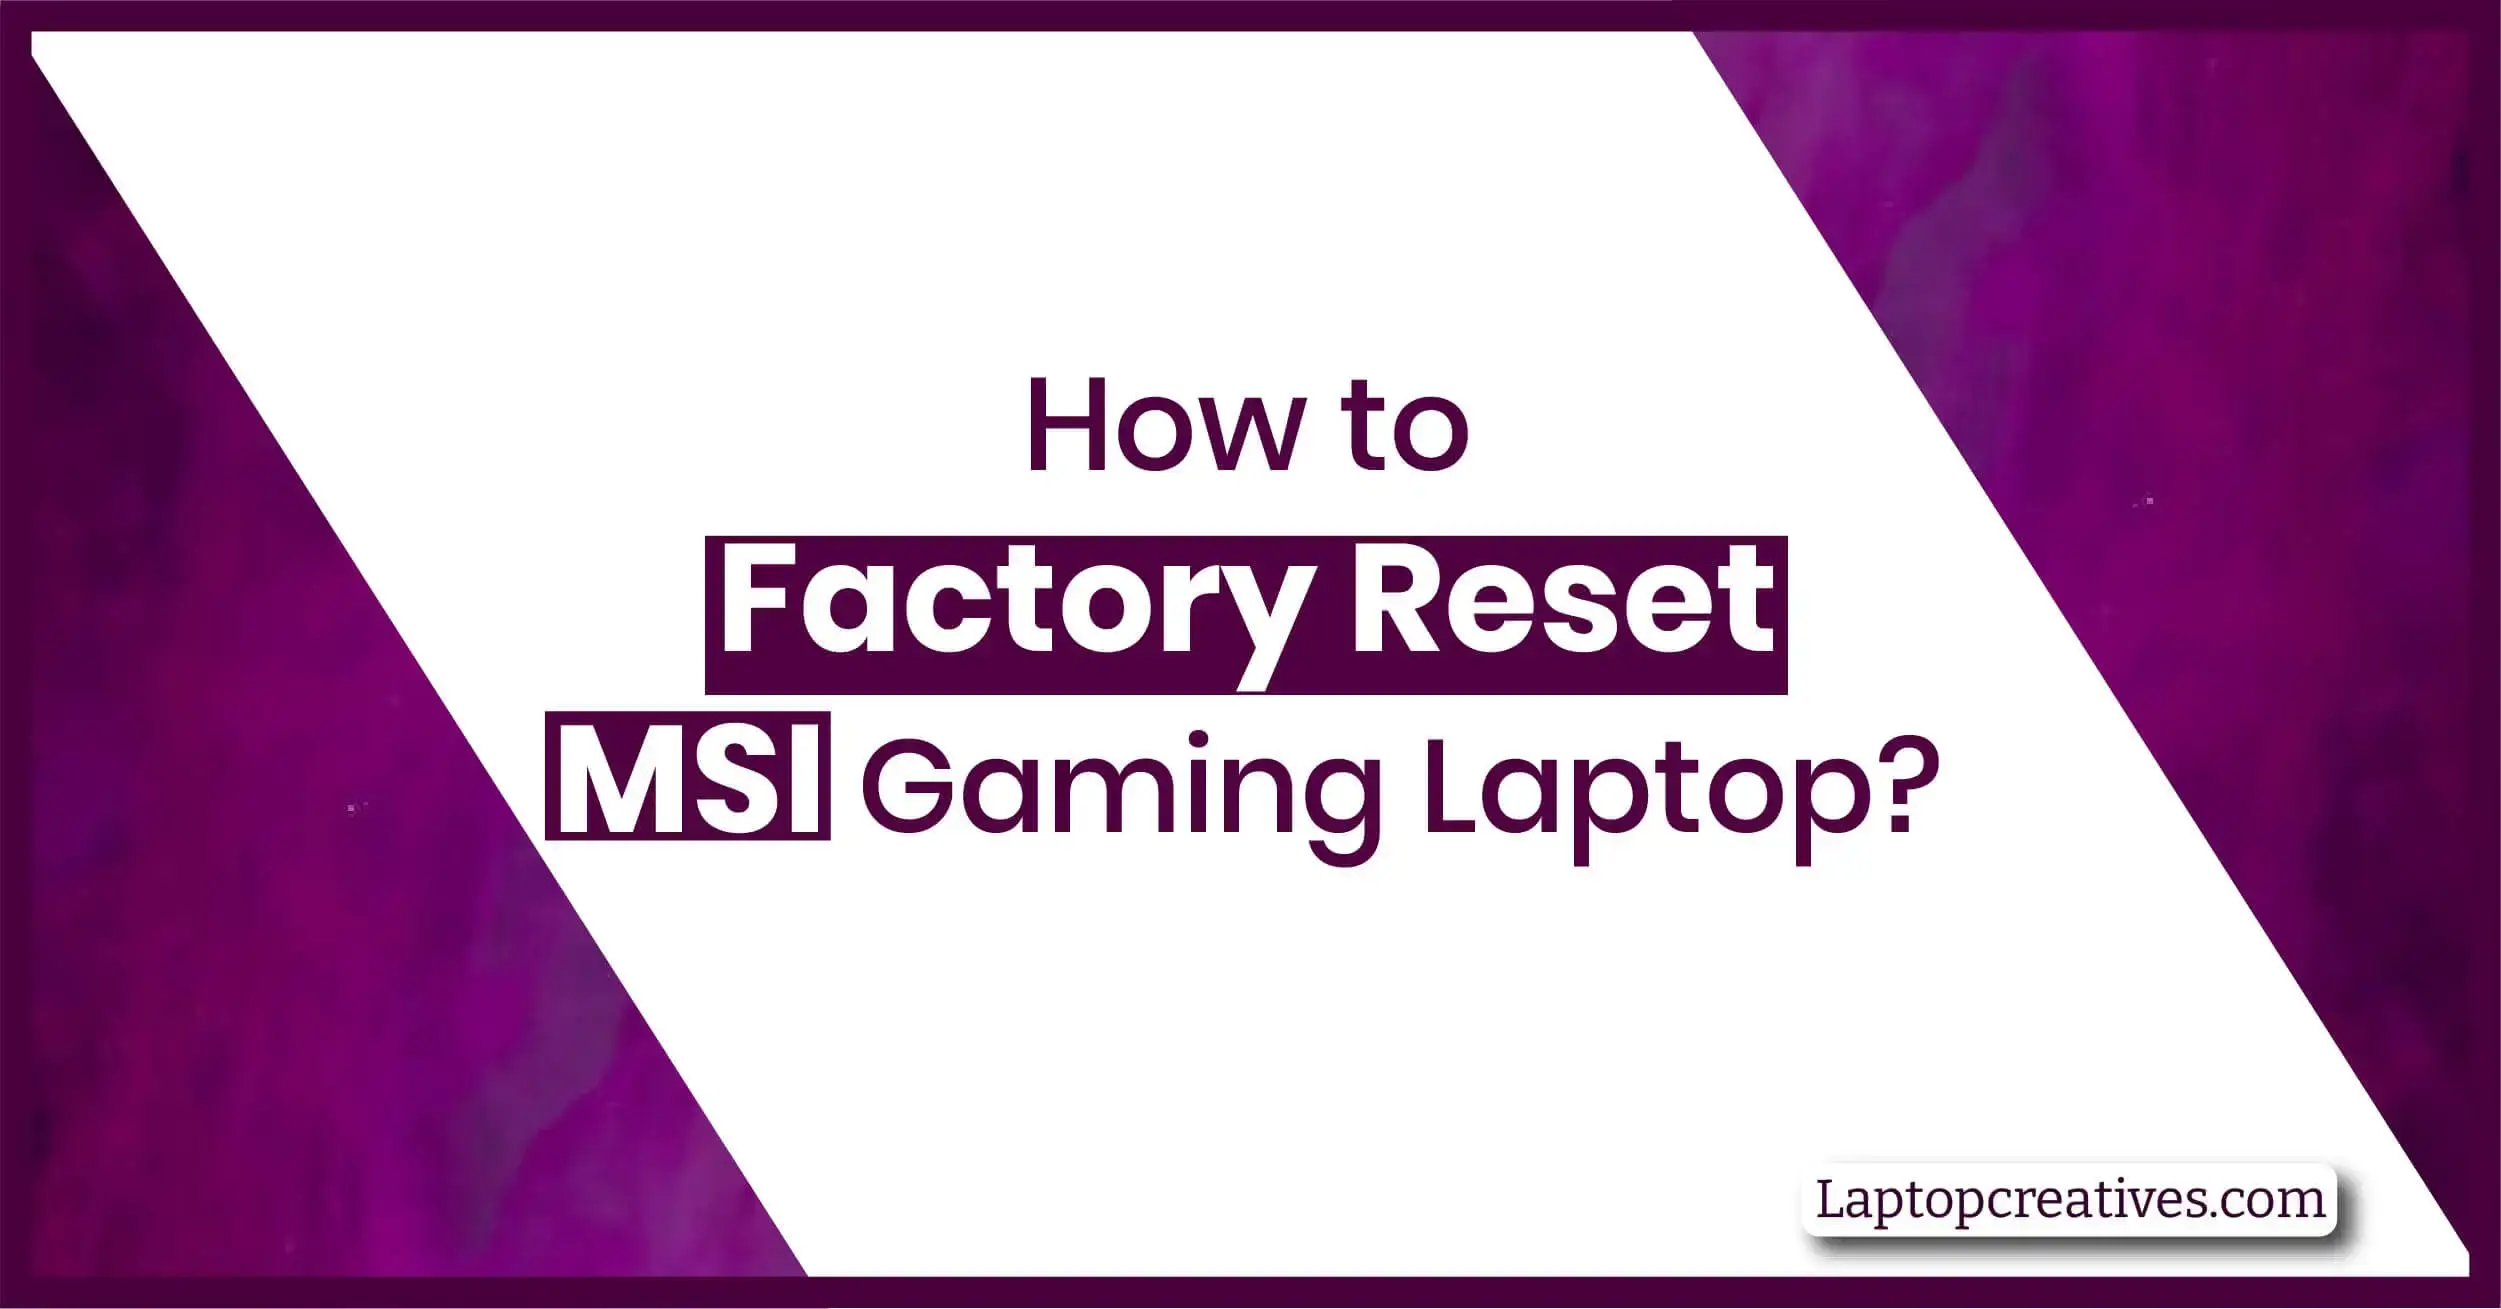 How to Factory Reset MSI Gaming Laptop